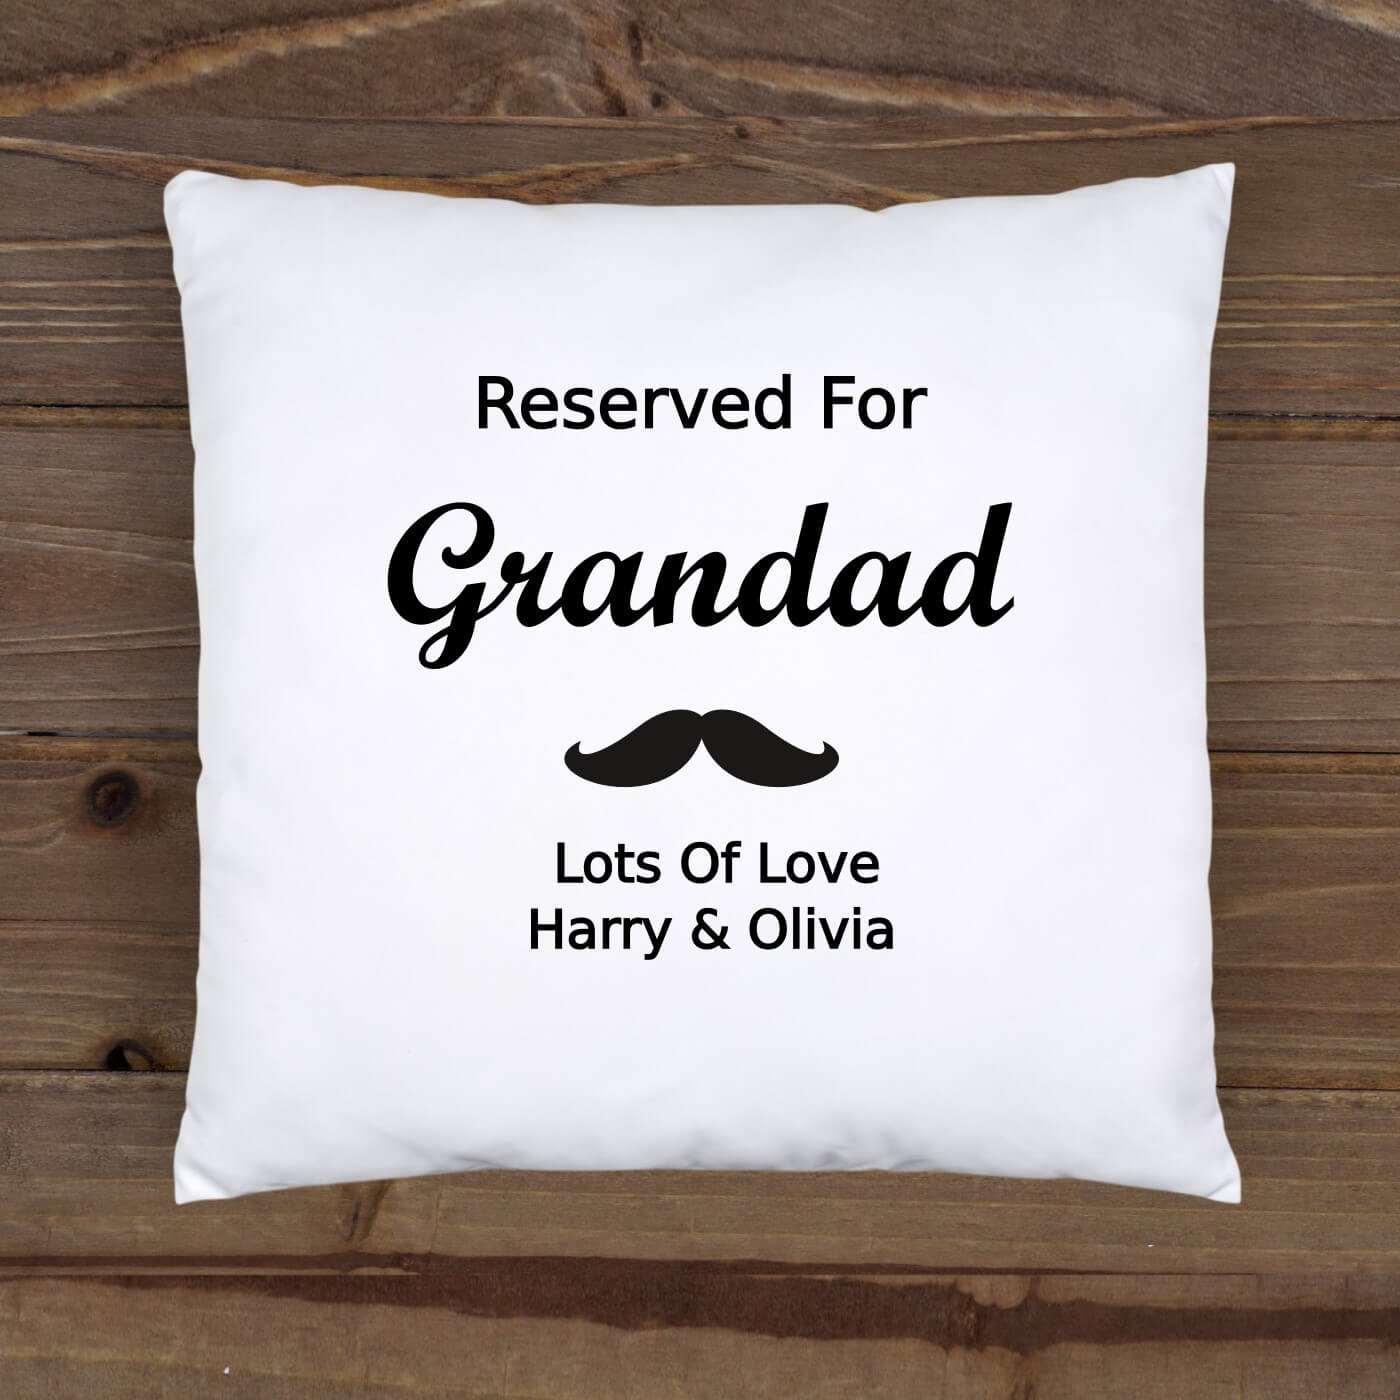 Personalised Cushion Cover - Reserved For Grandad